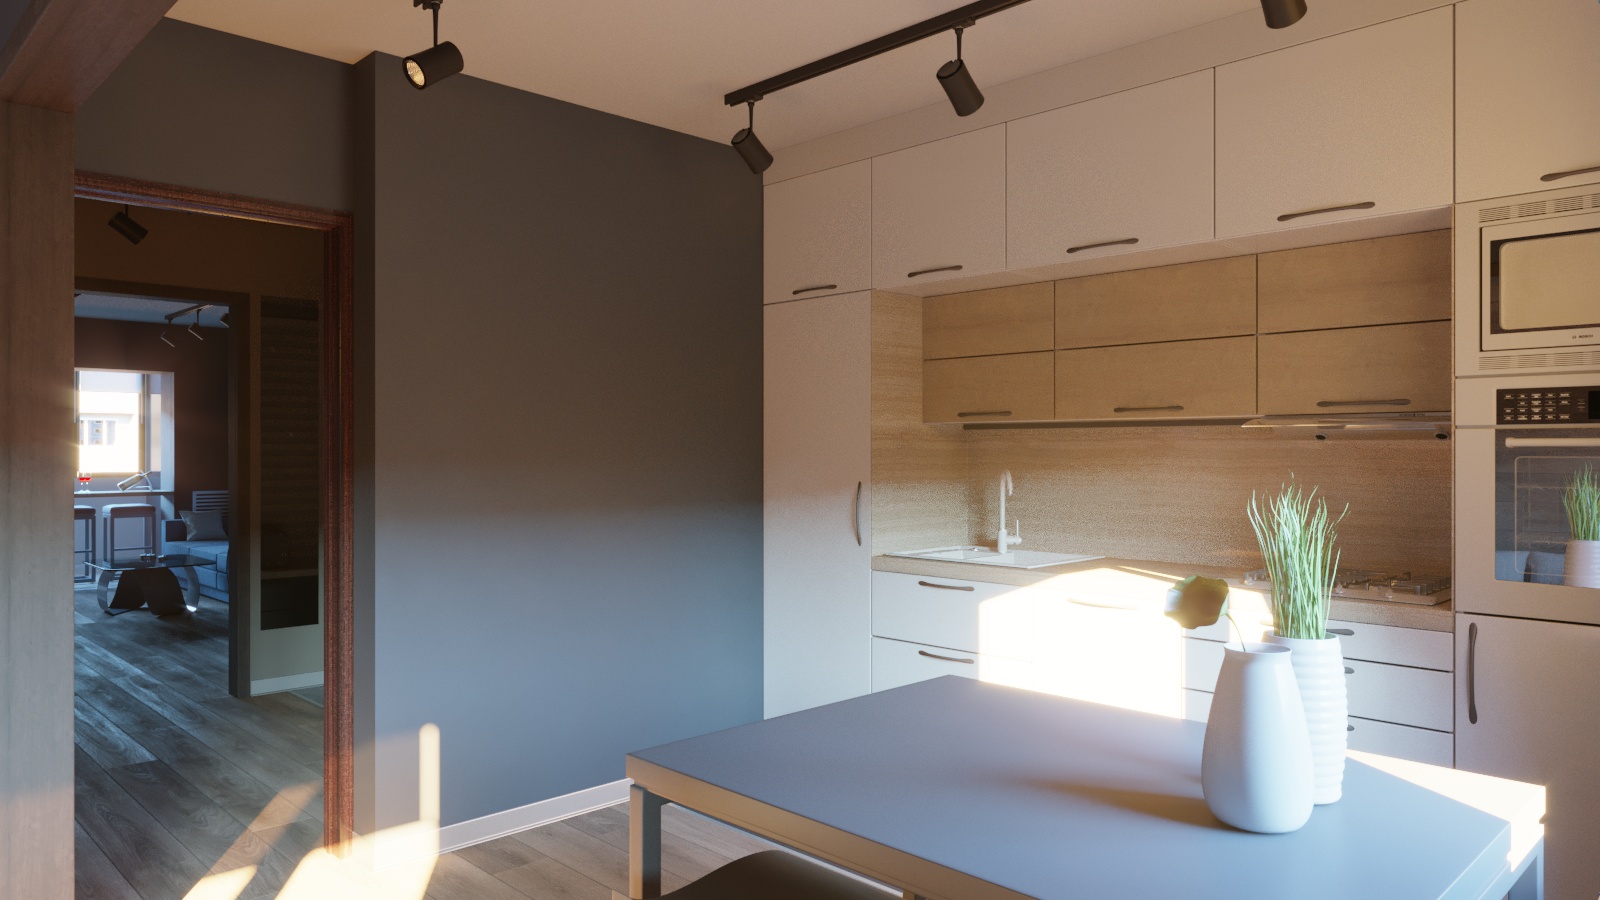 Kitchen with a small living room in 3d max corona render image